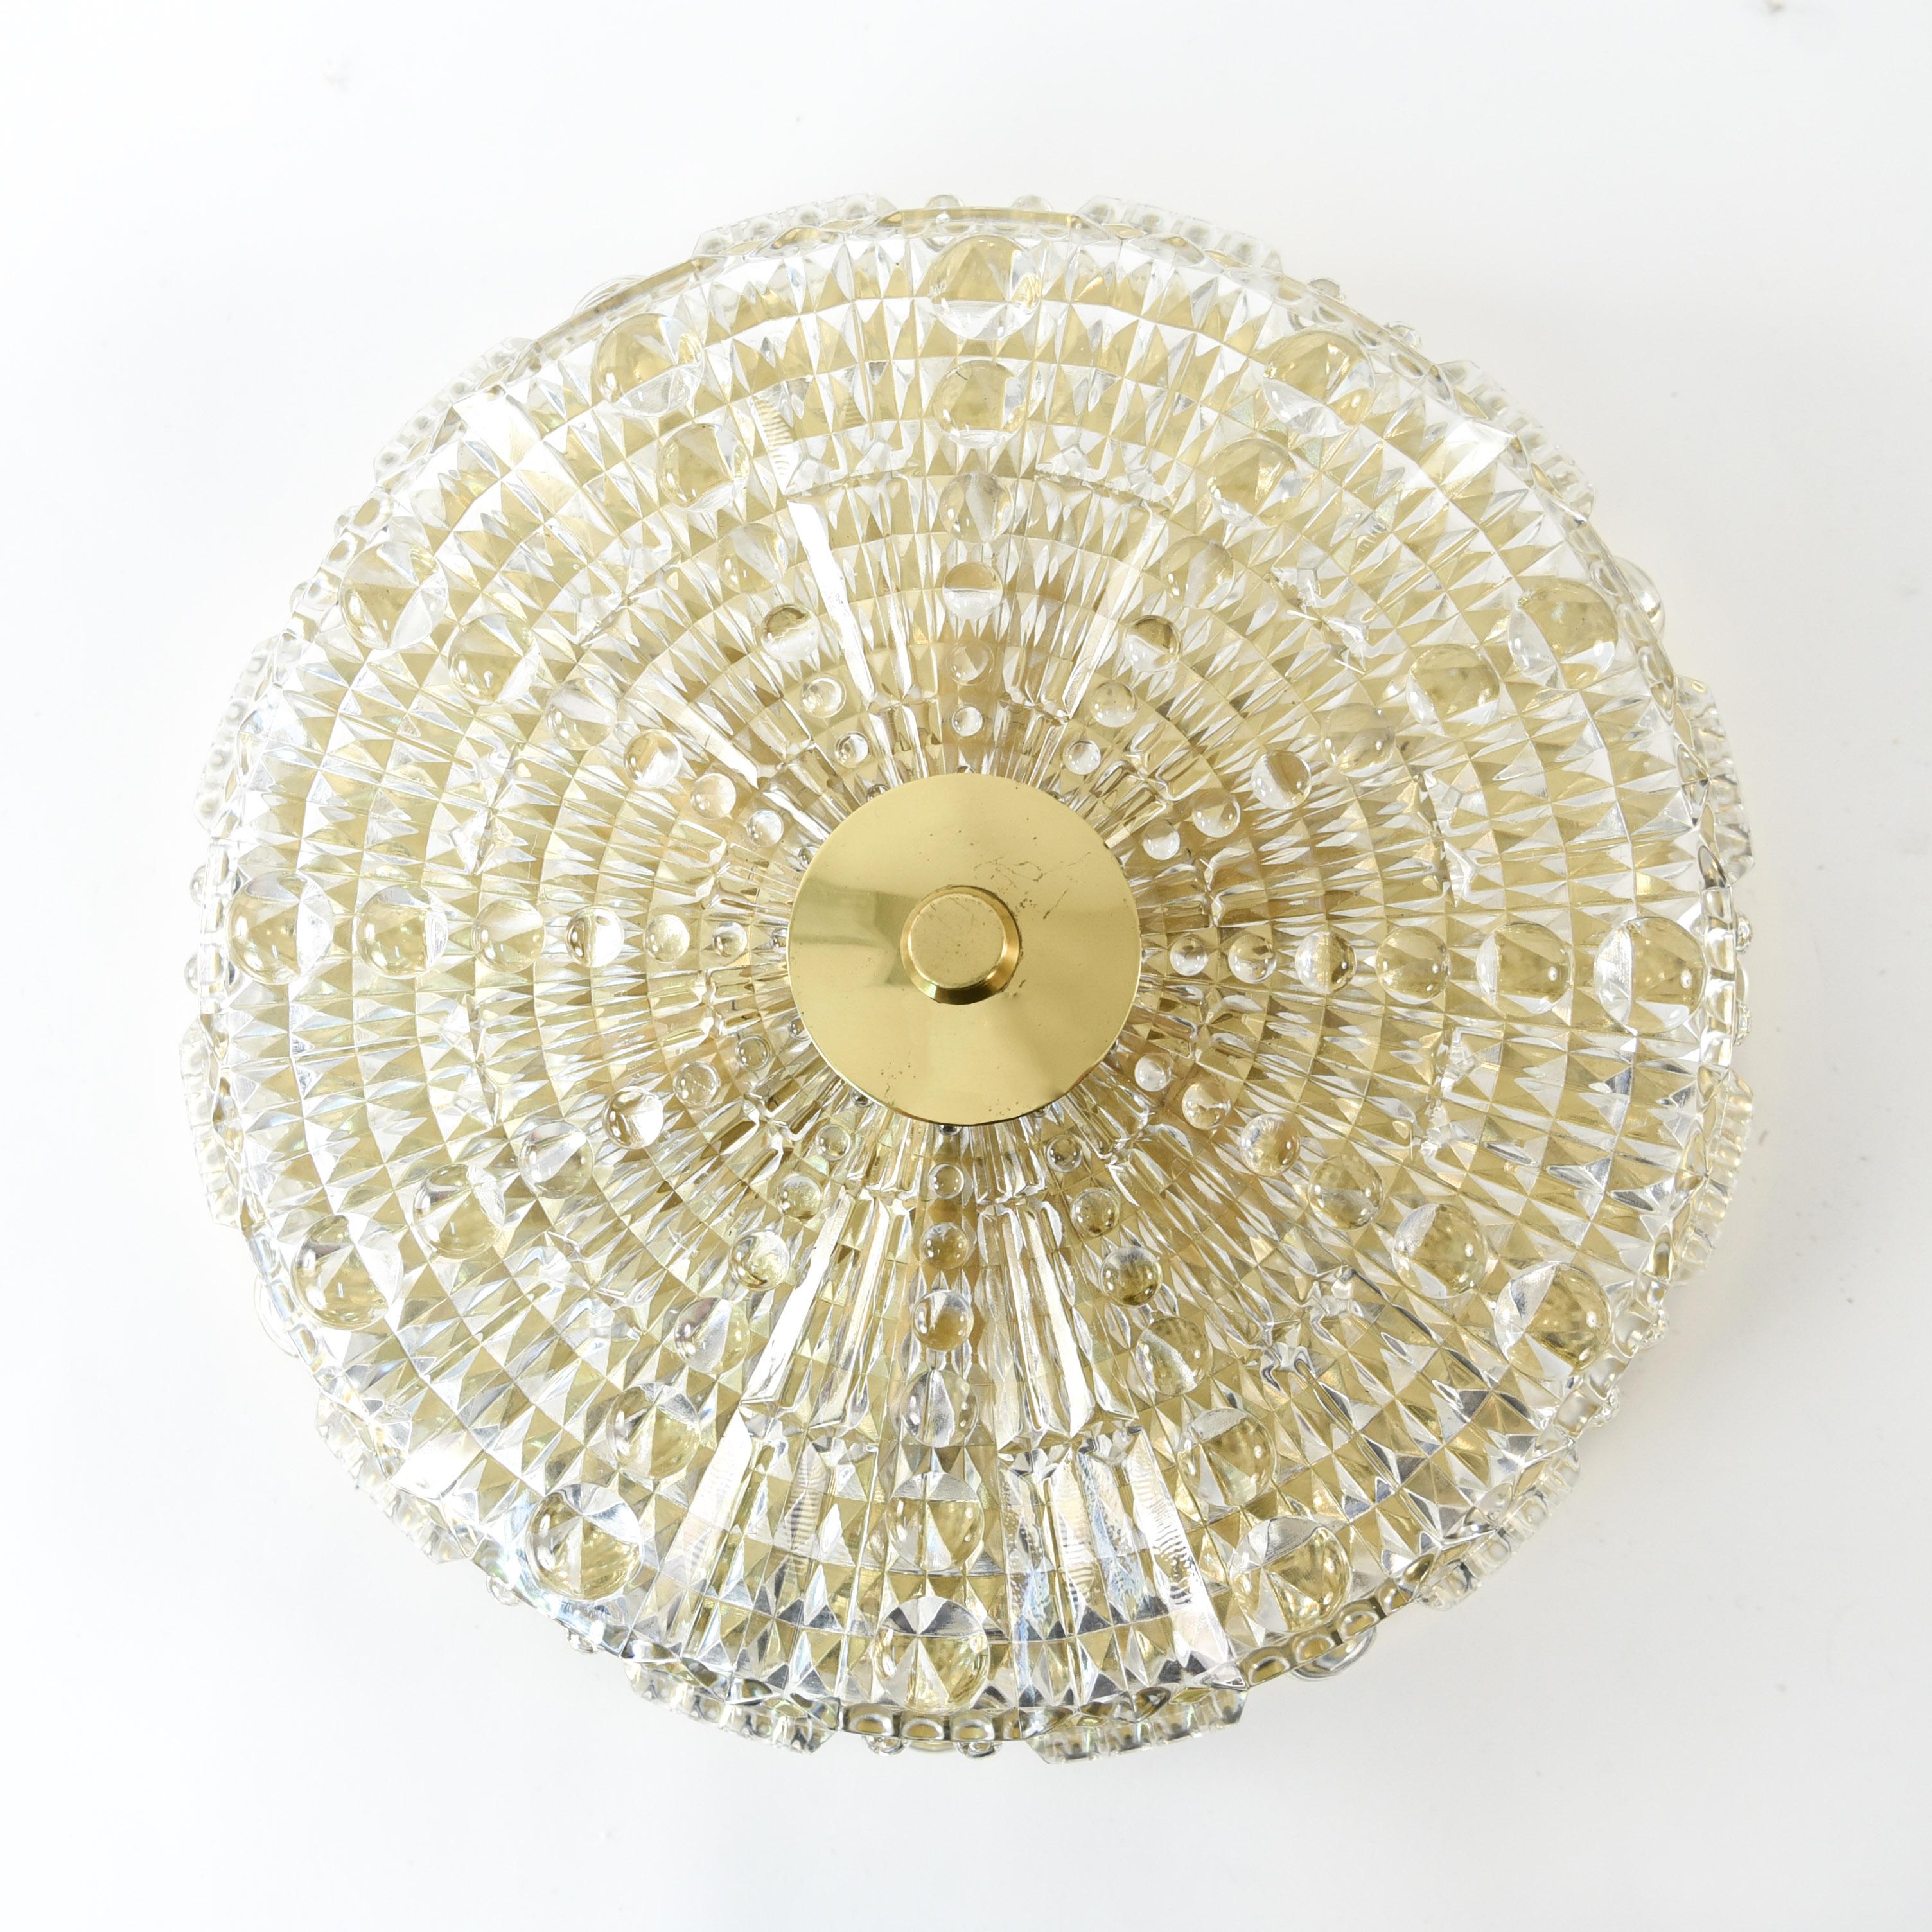 This Swedish midcentury pendant chandelier was designed by Carl Fagerlund and produced by Orrefors in the 1960s. This piece features a textured crystal body with brass hardware and is of a classic form characteristic of Fagerlund's collaborations